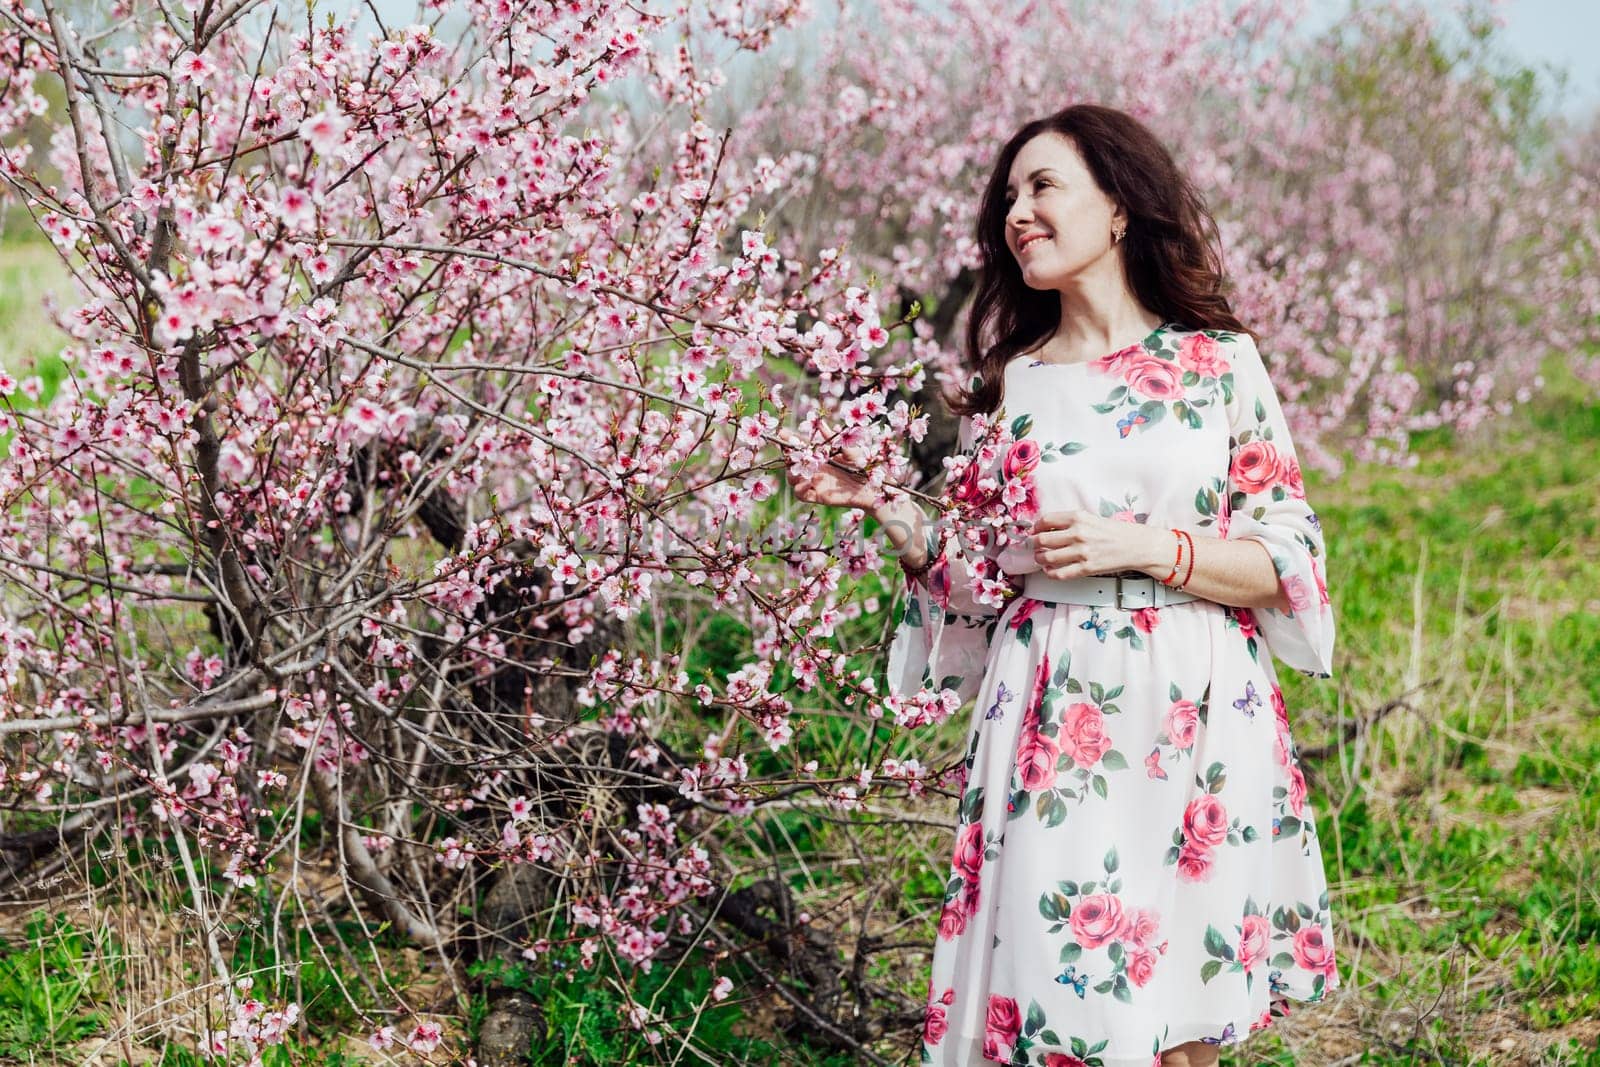 nature park spring woman stands in garden of flowering pink trees